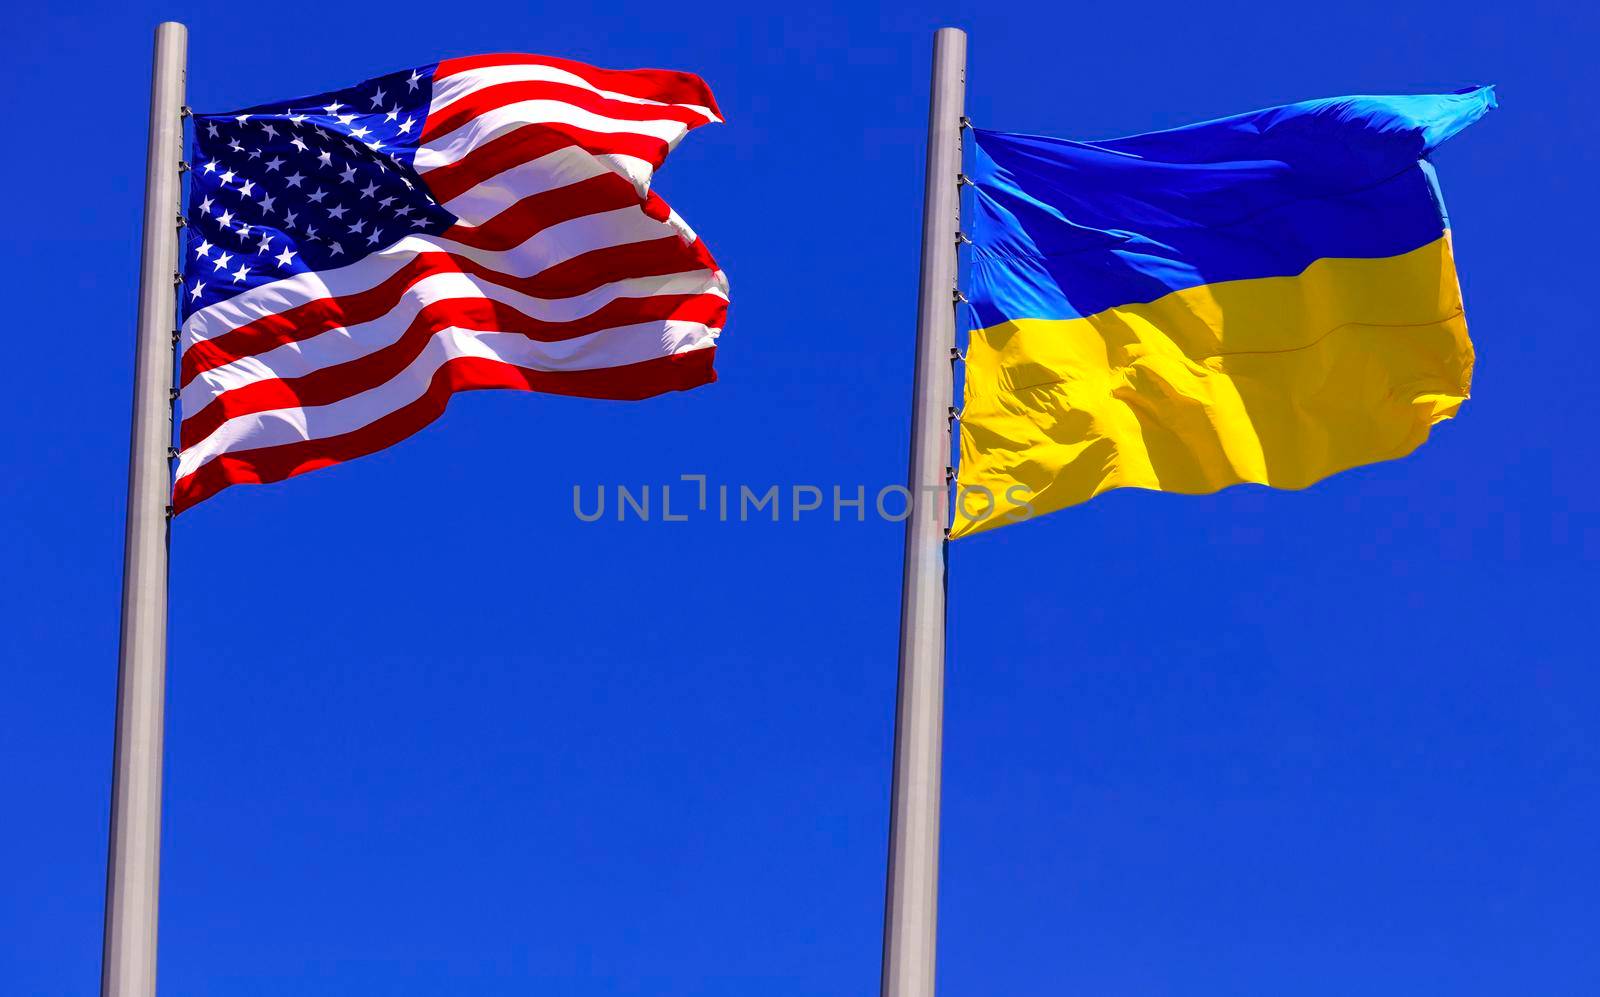 flags of the USA and Ukraine by Nobilior